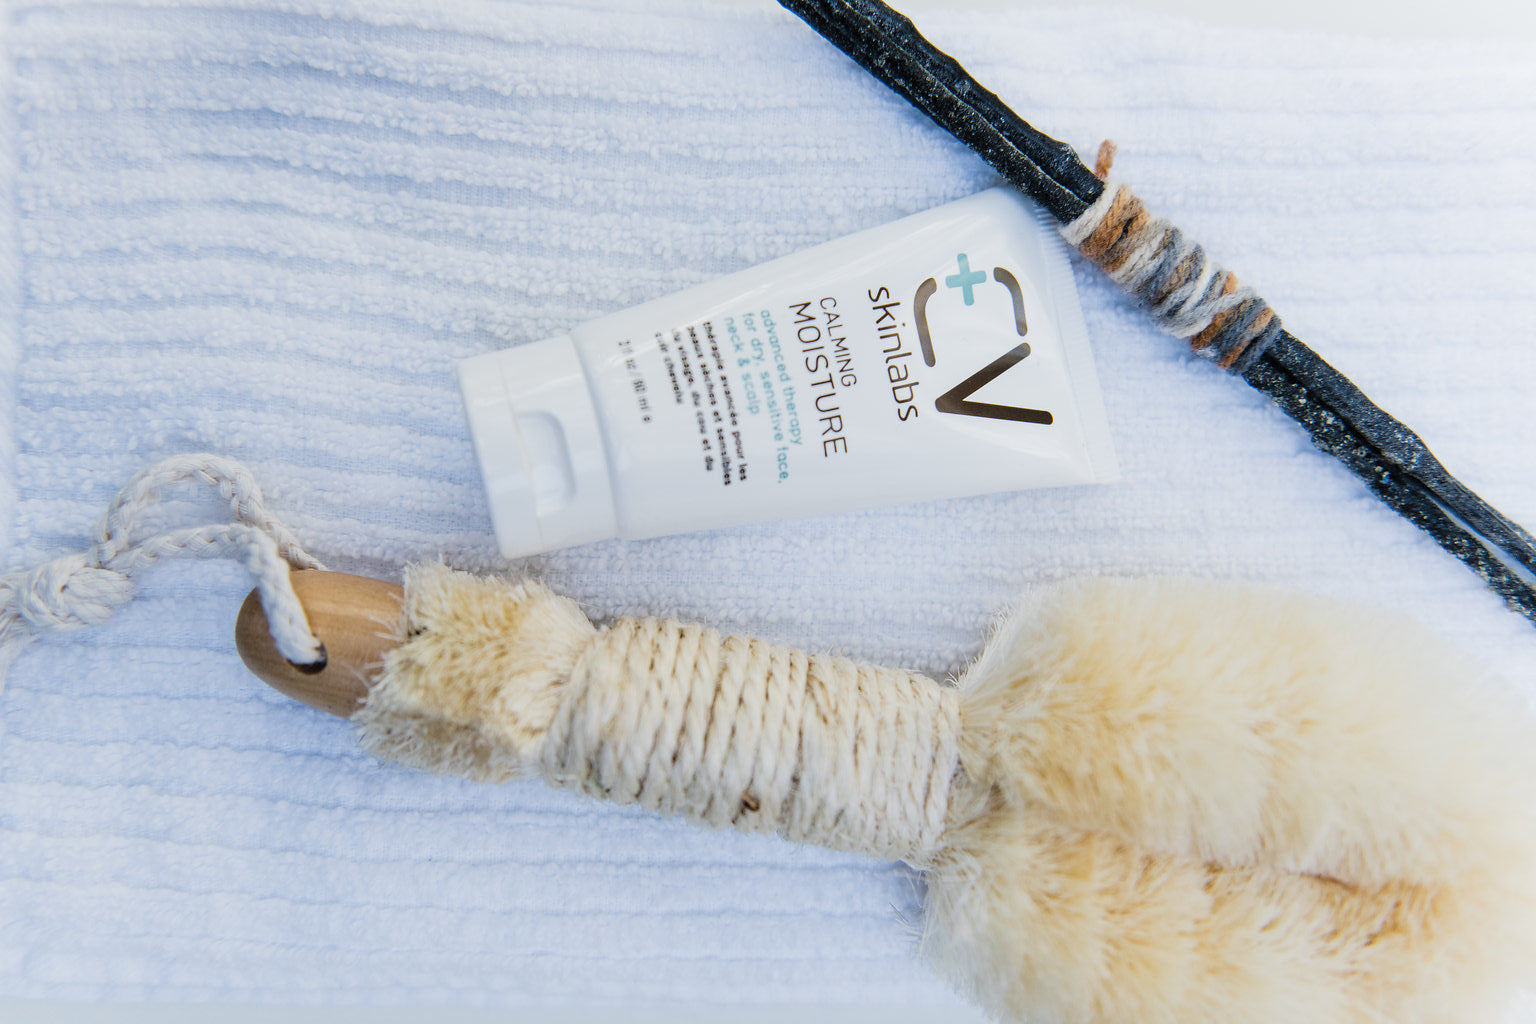 How to dry brush - it's more than skin deep